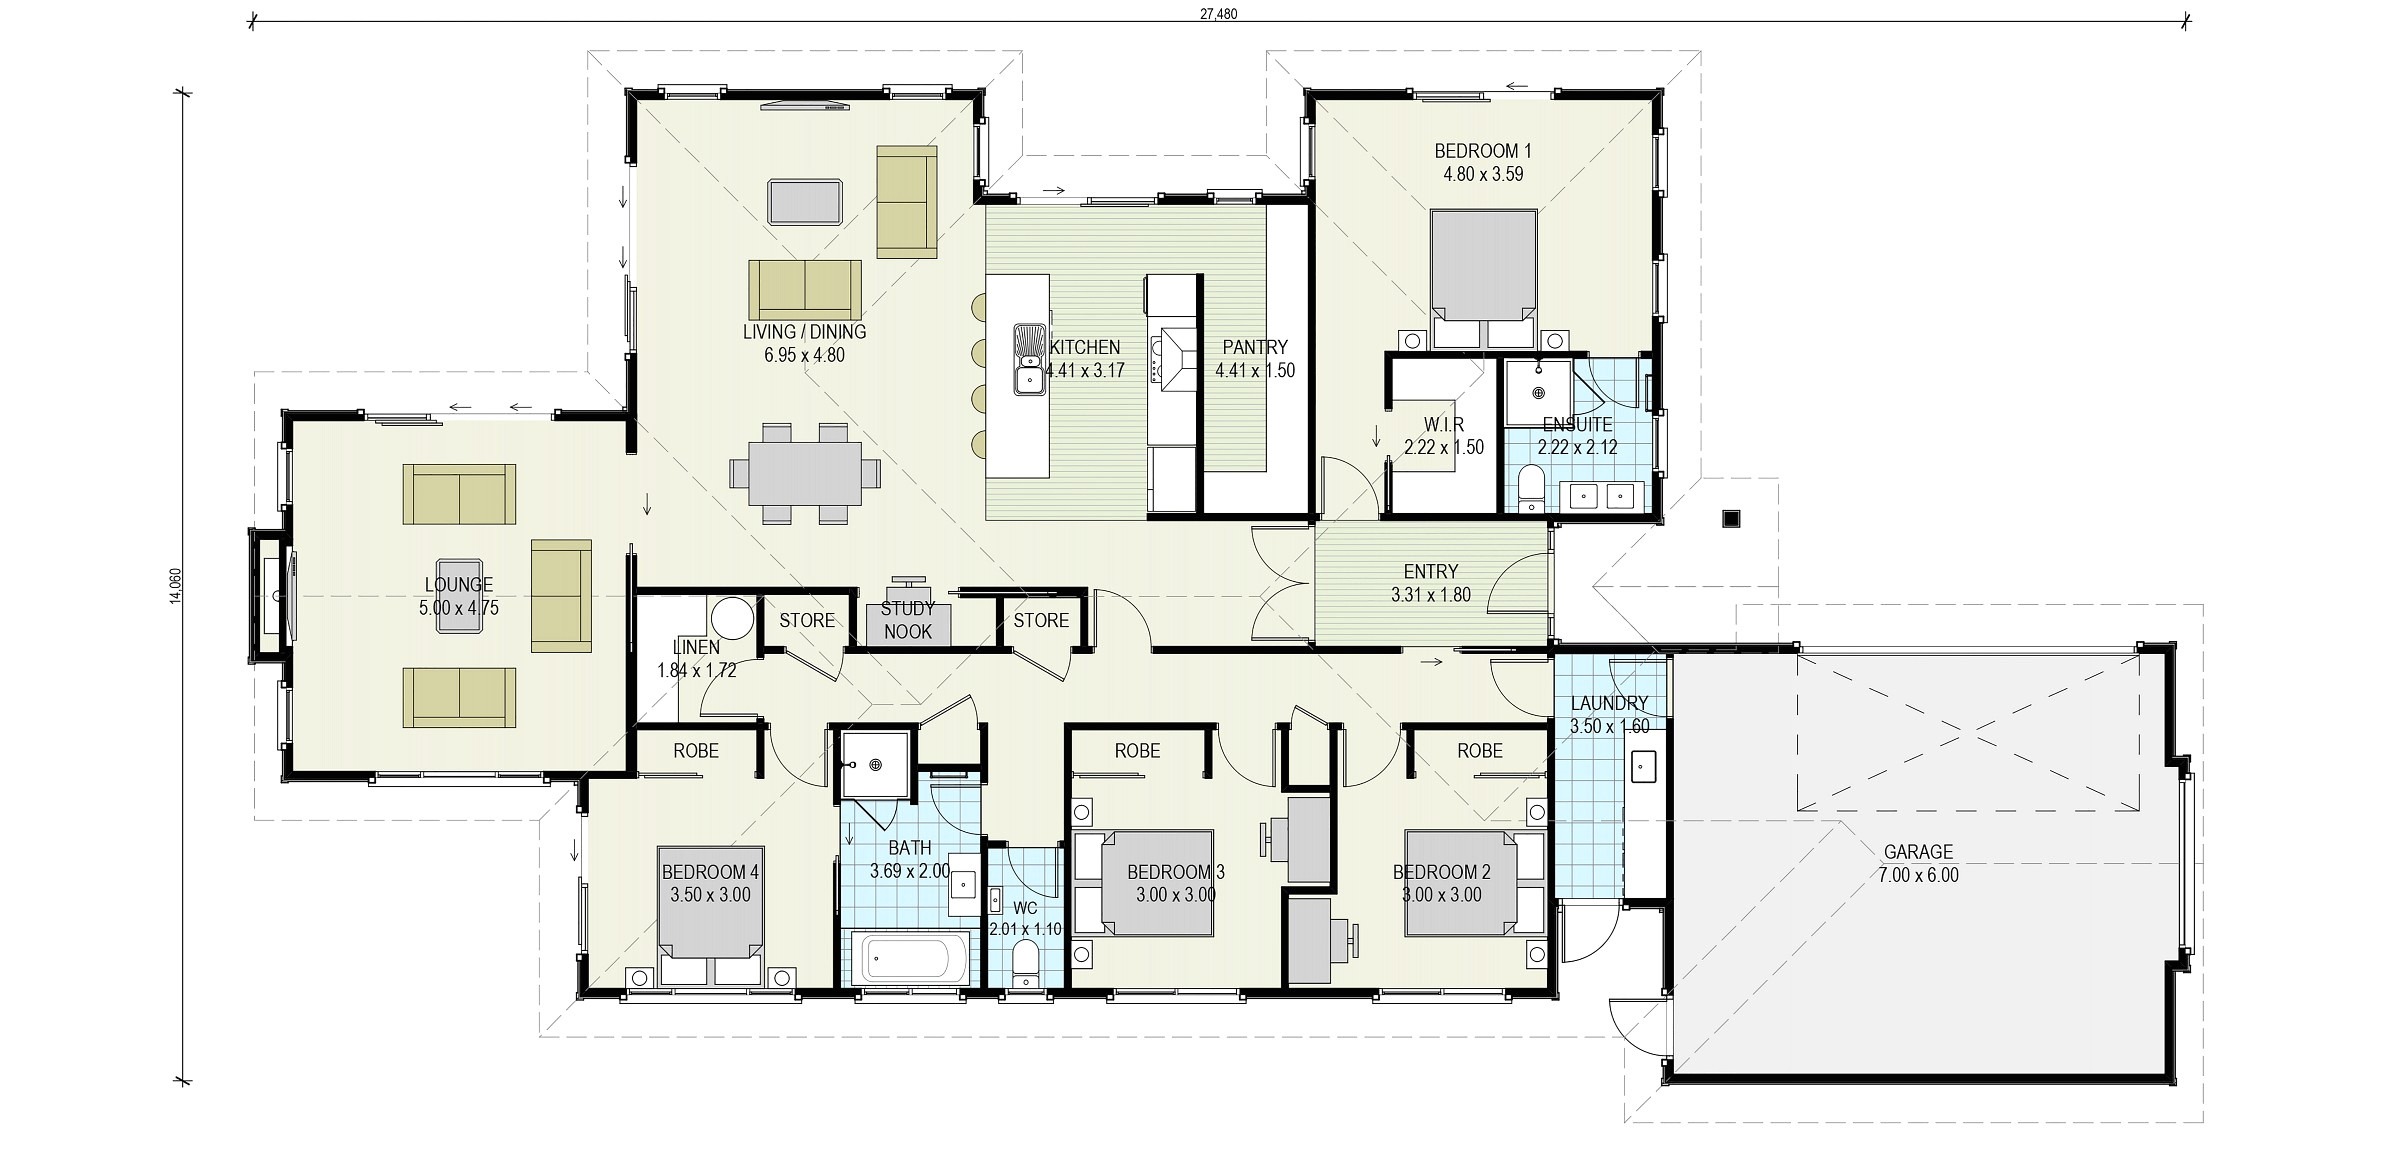 homes and floor plans inspirational mike greer homes concept plan conference